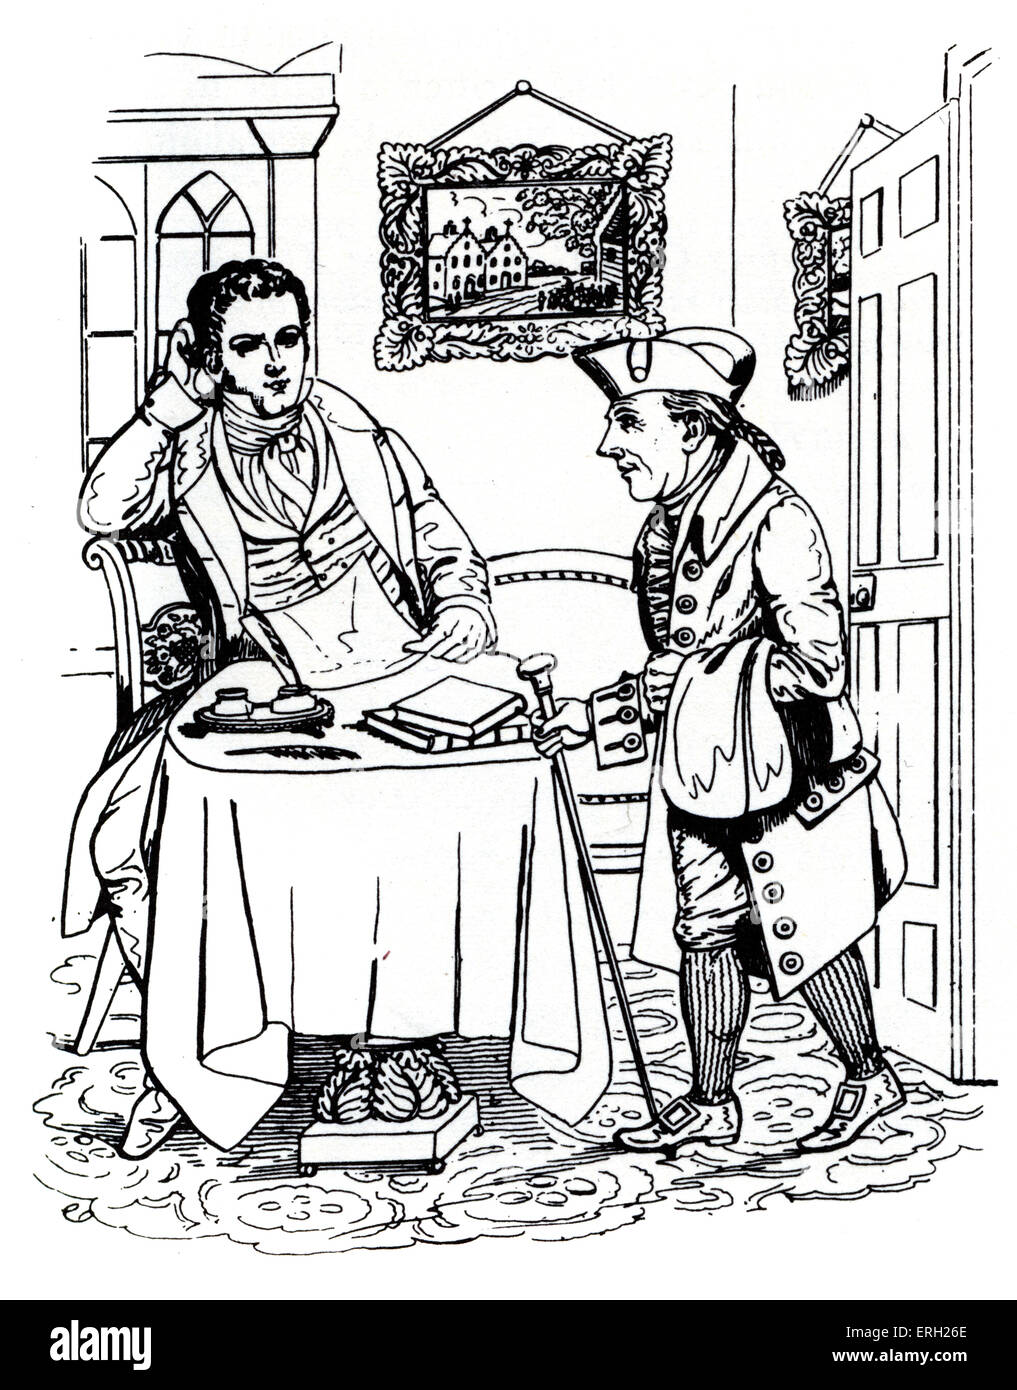 Knickerbocker's History of New York by Washington Irving.  'Father Knickerbox visits Washington Irving',American author and Stock Photo